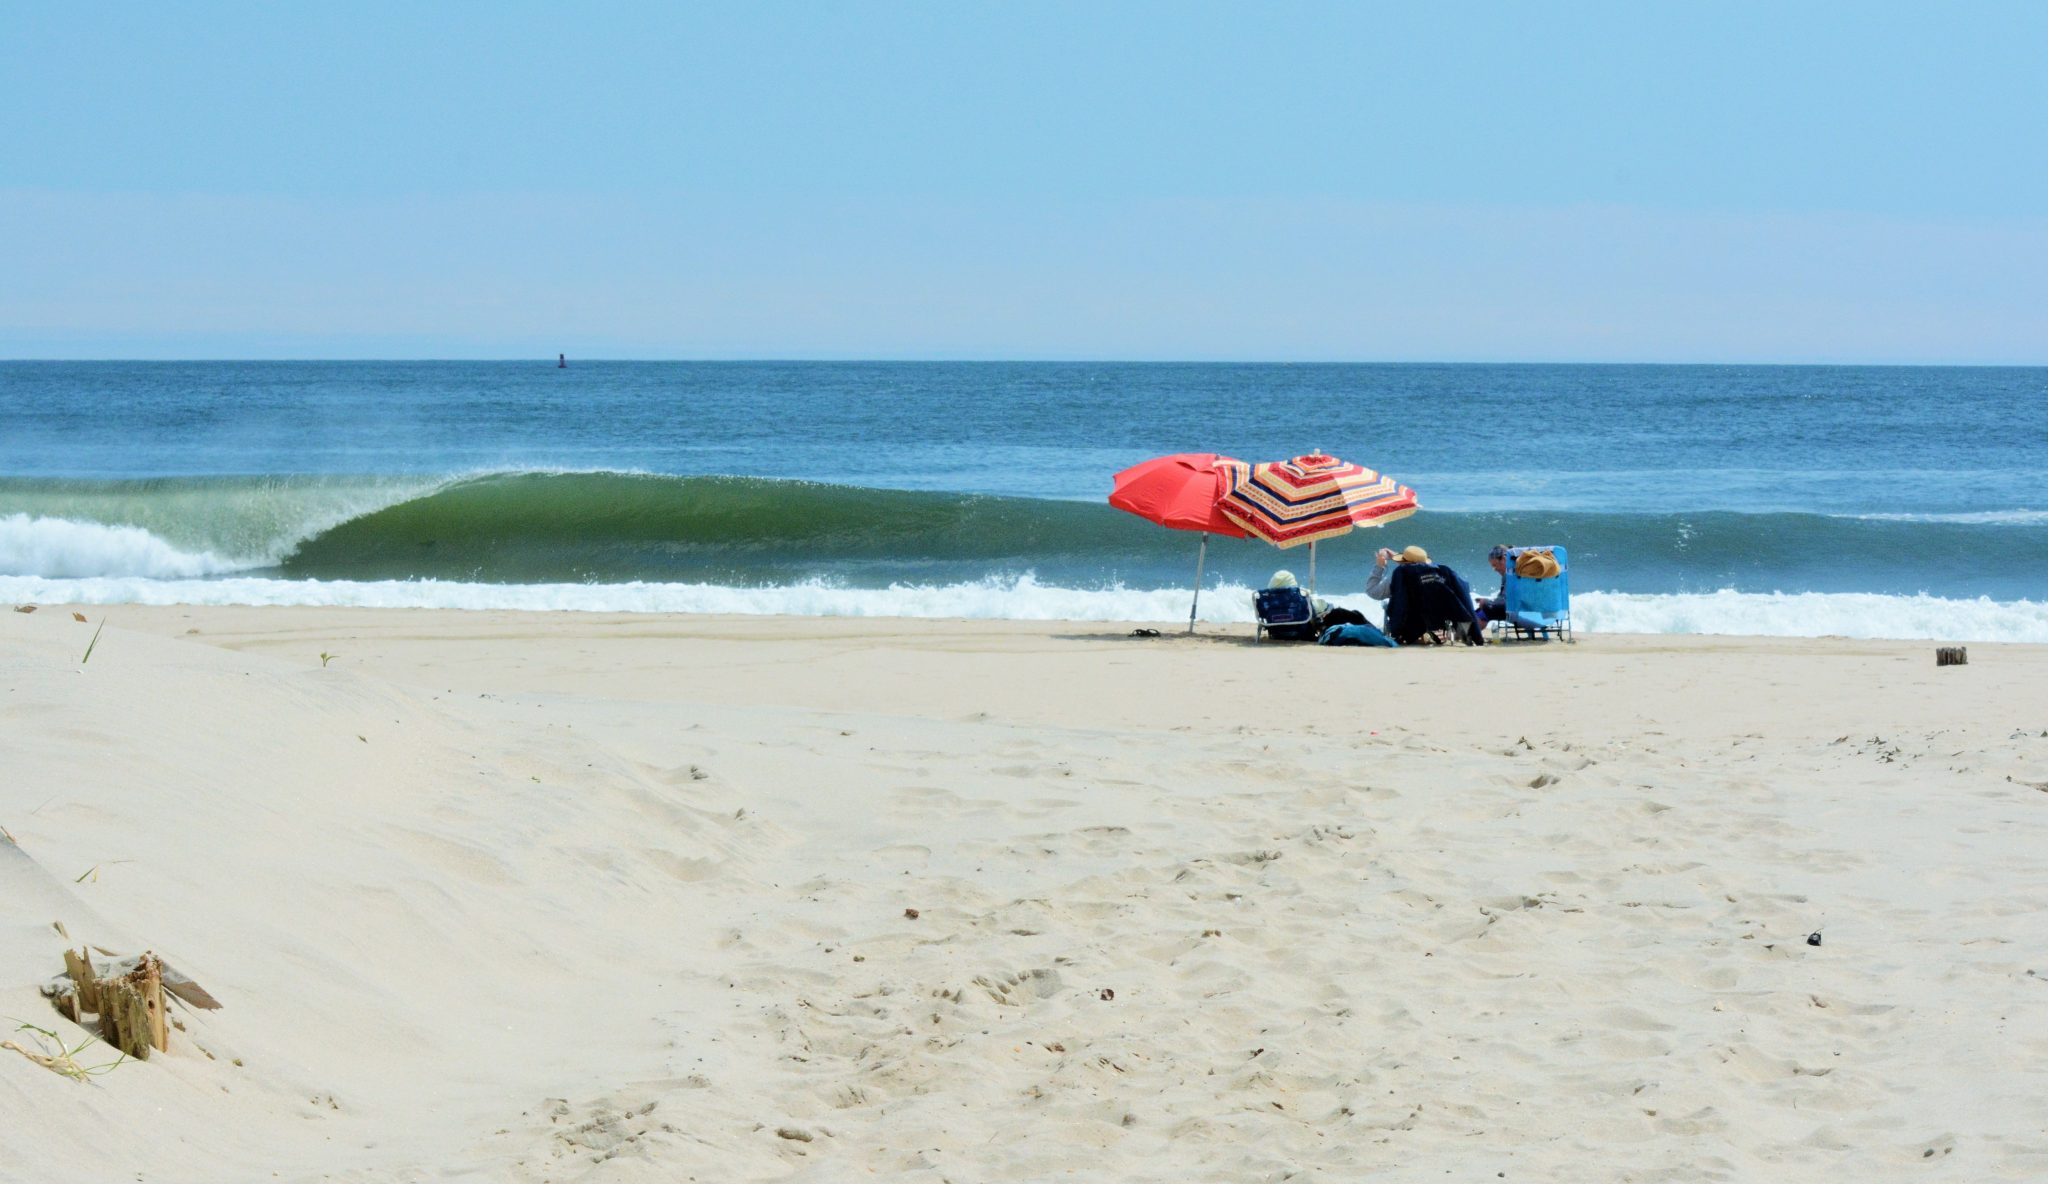 <img class="alignnone size-large wp-image-9751" src="https://www.easternsurf.com/wp-content/uploads/2017/05/NJ-Mike-Vuocolo-Point-Pleasant-Beach-Perfect-Spring-Morning-1024x592.jpg" alt="May 14, 2017" width="960" height="555" />

Mother Nature came through for surfers on Mother’s Day, delivering a beautiful day of perfect waves up and down the Mid-Atlantic coast. This shot from New Jersey taken by Mike Vuocolo.

[template id=”412″]